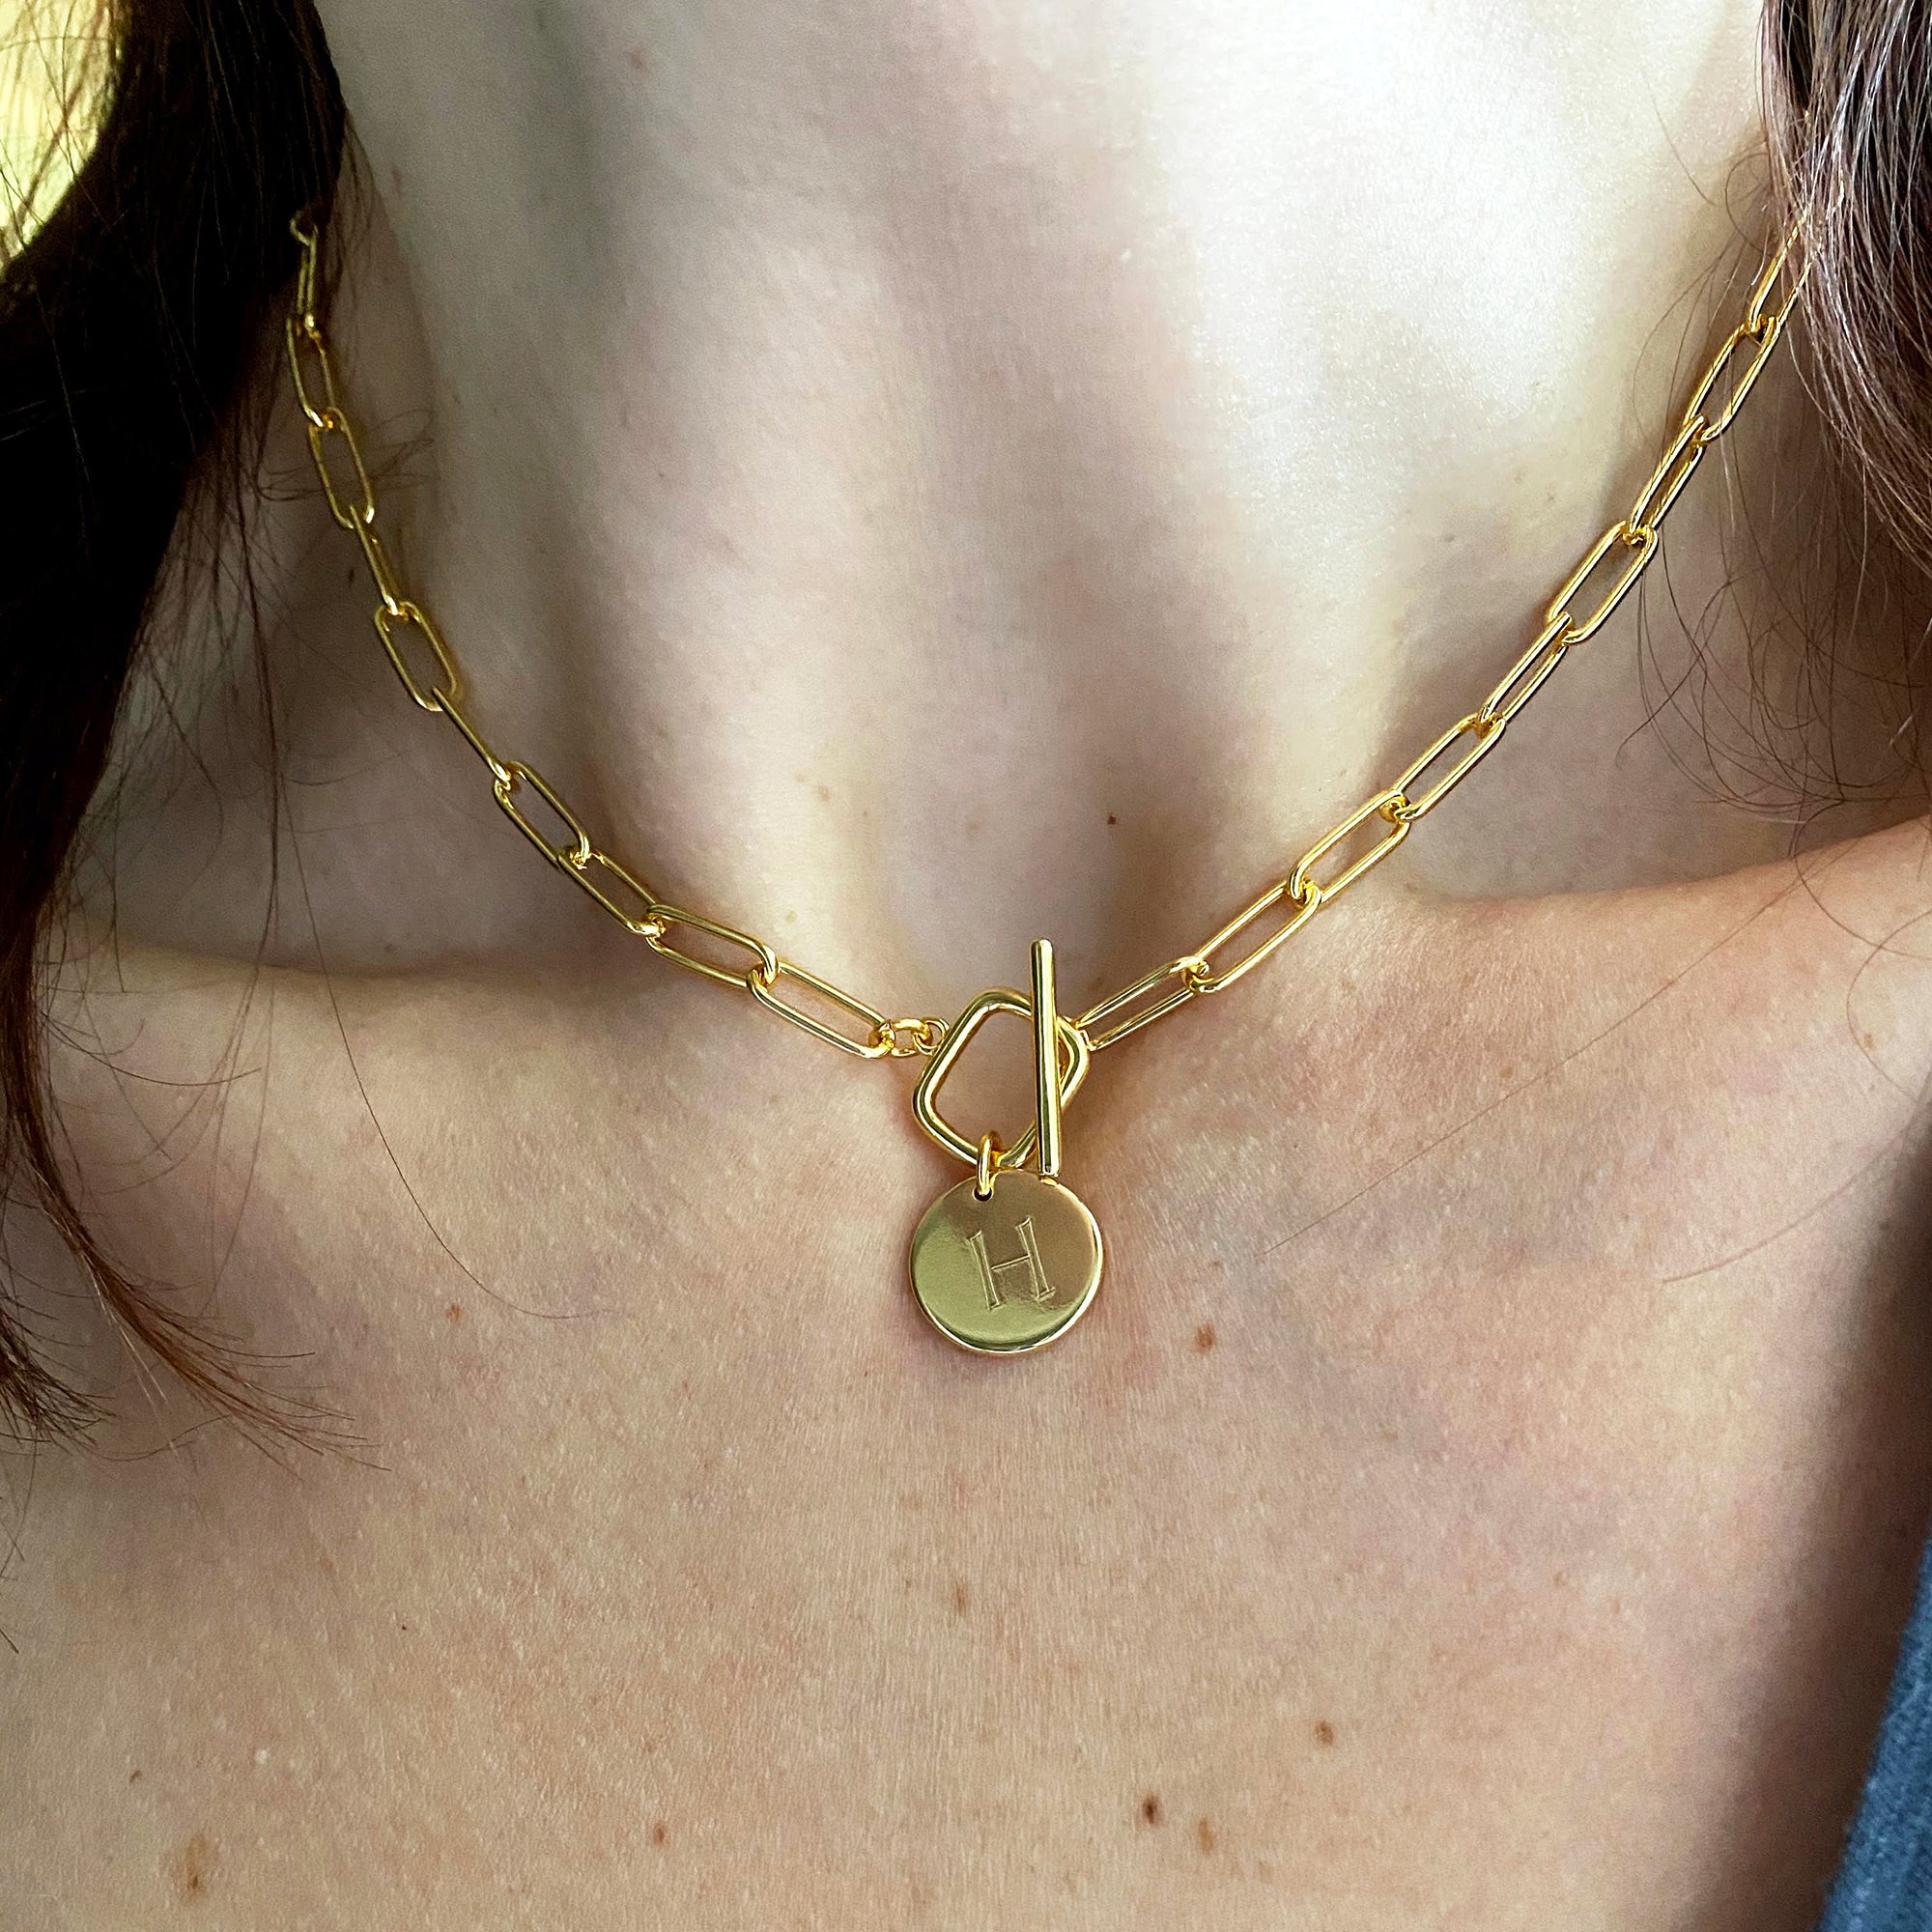 ChunkyPaperclipToggleInitialNecklace Gold N0283 13